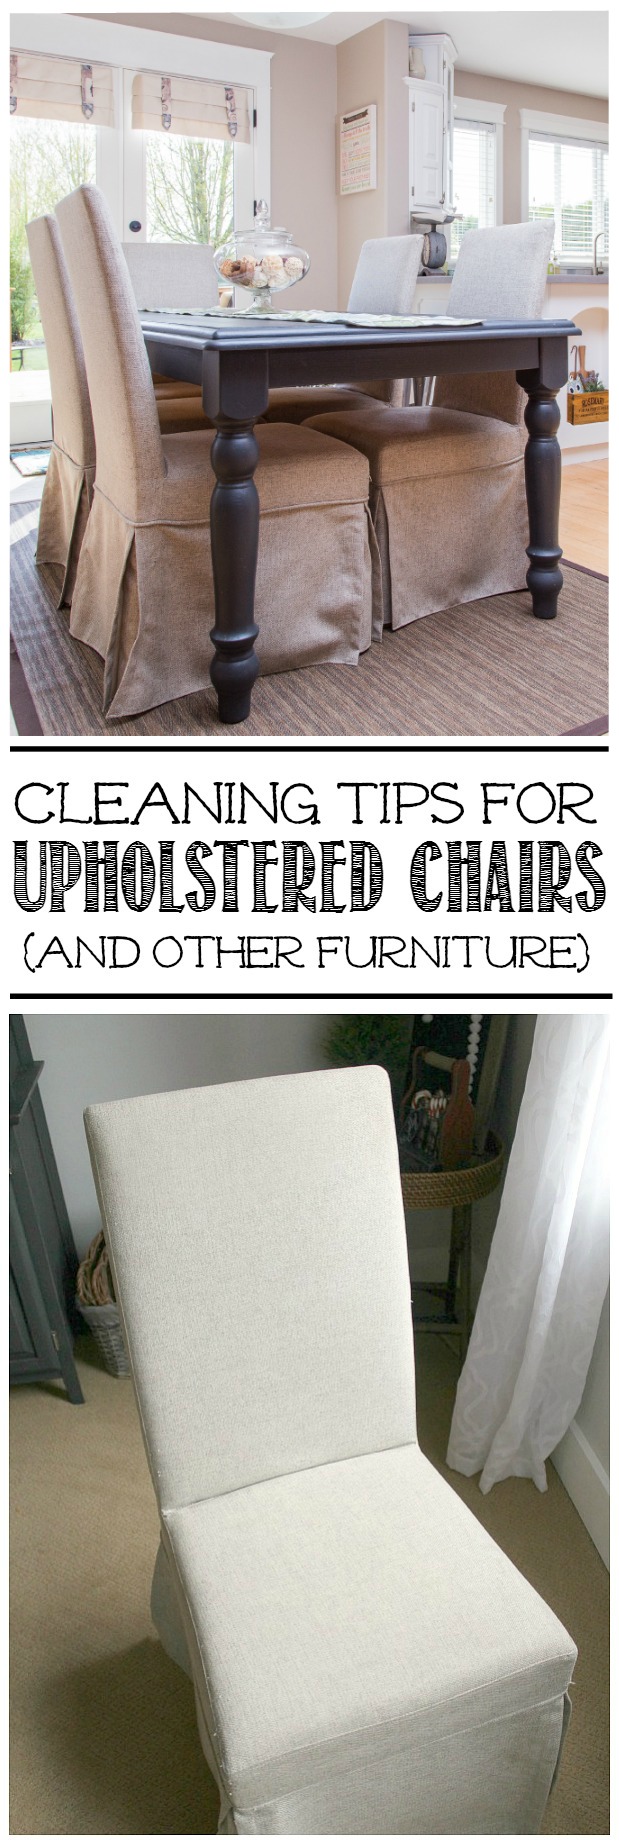 How To Clean Upholstered Chairs, How To Clean Fabric Dining Chairs With Baking Soda